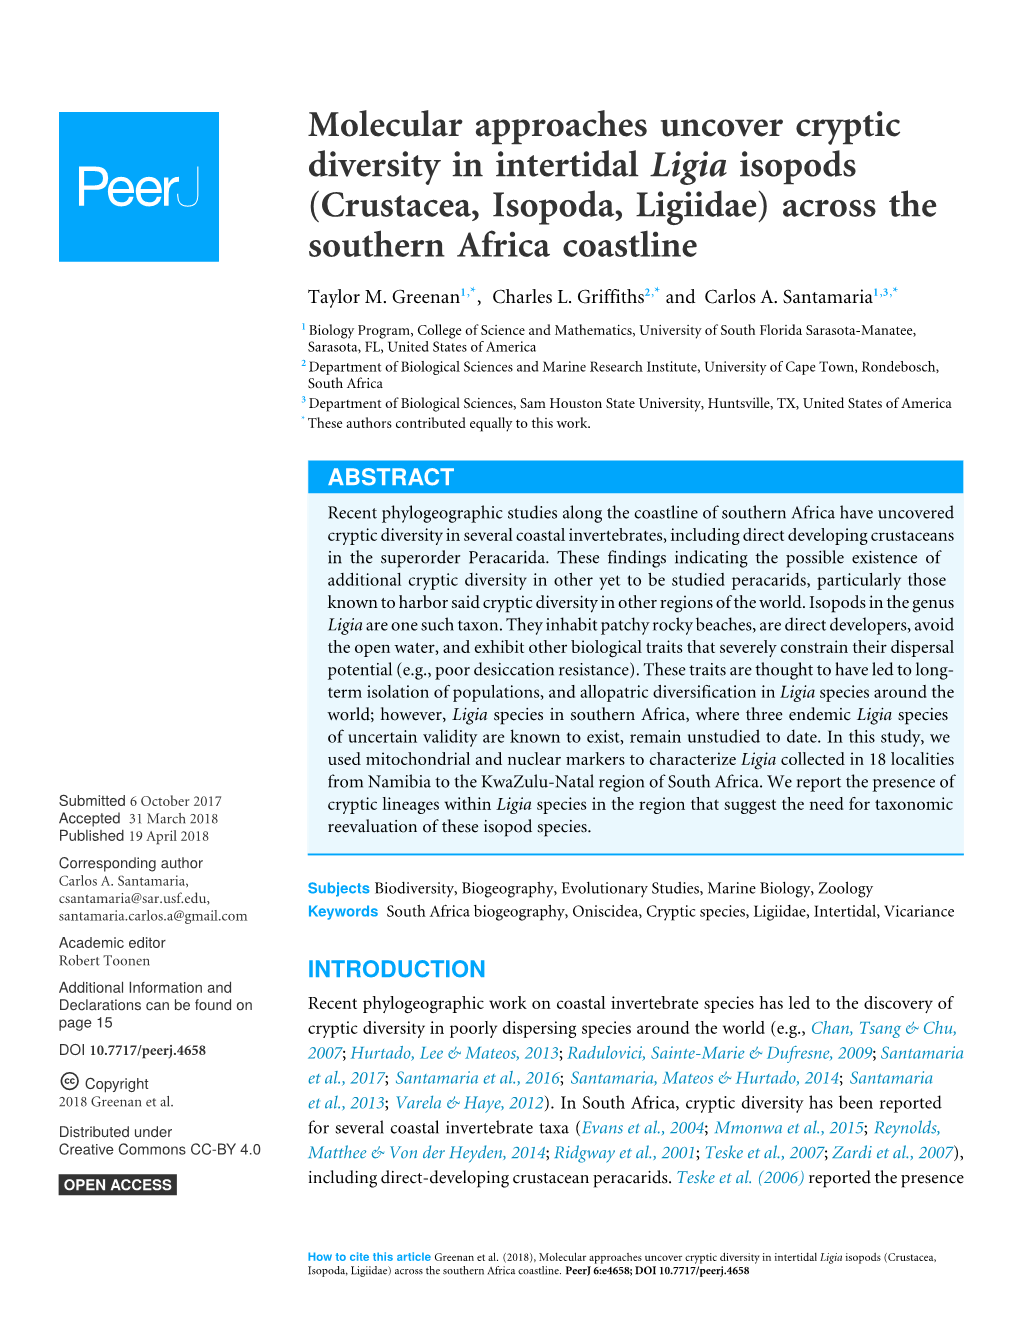 Molecular Approaches Uncover Cryptic Diversity in Intertidal Ligia Isopods (Crustacea, Isopoda, Ligiidae) Across the Southern Africa Coastline